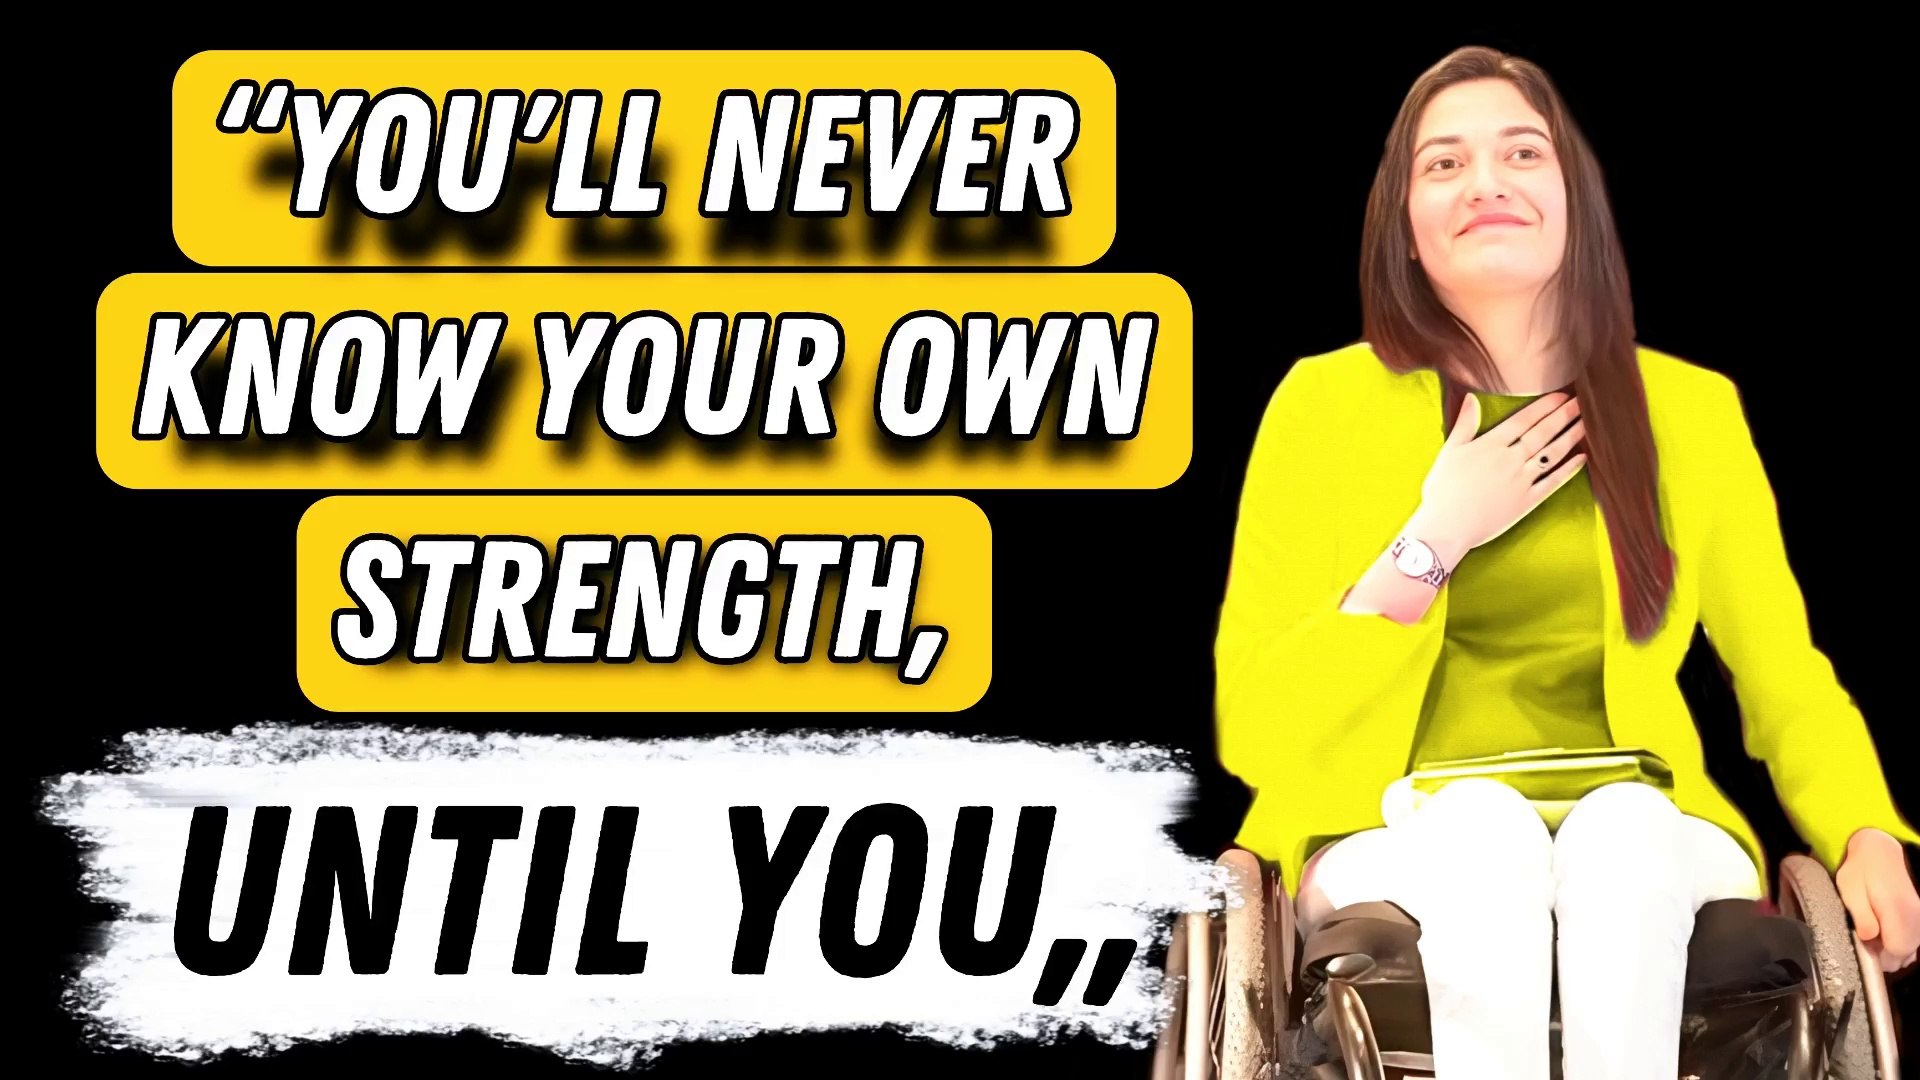 Muniba Mazari 30 Quotes That Will Help You Fight Back in Tough Times  (Motivational Speaker) - video Dailymotion